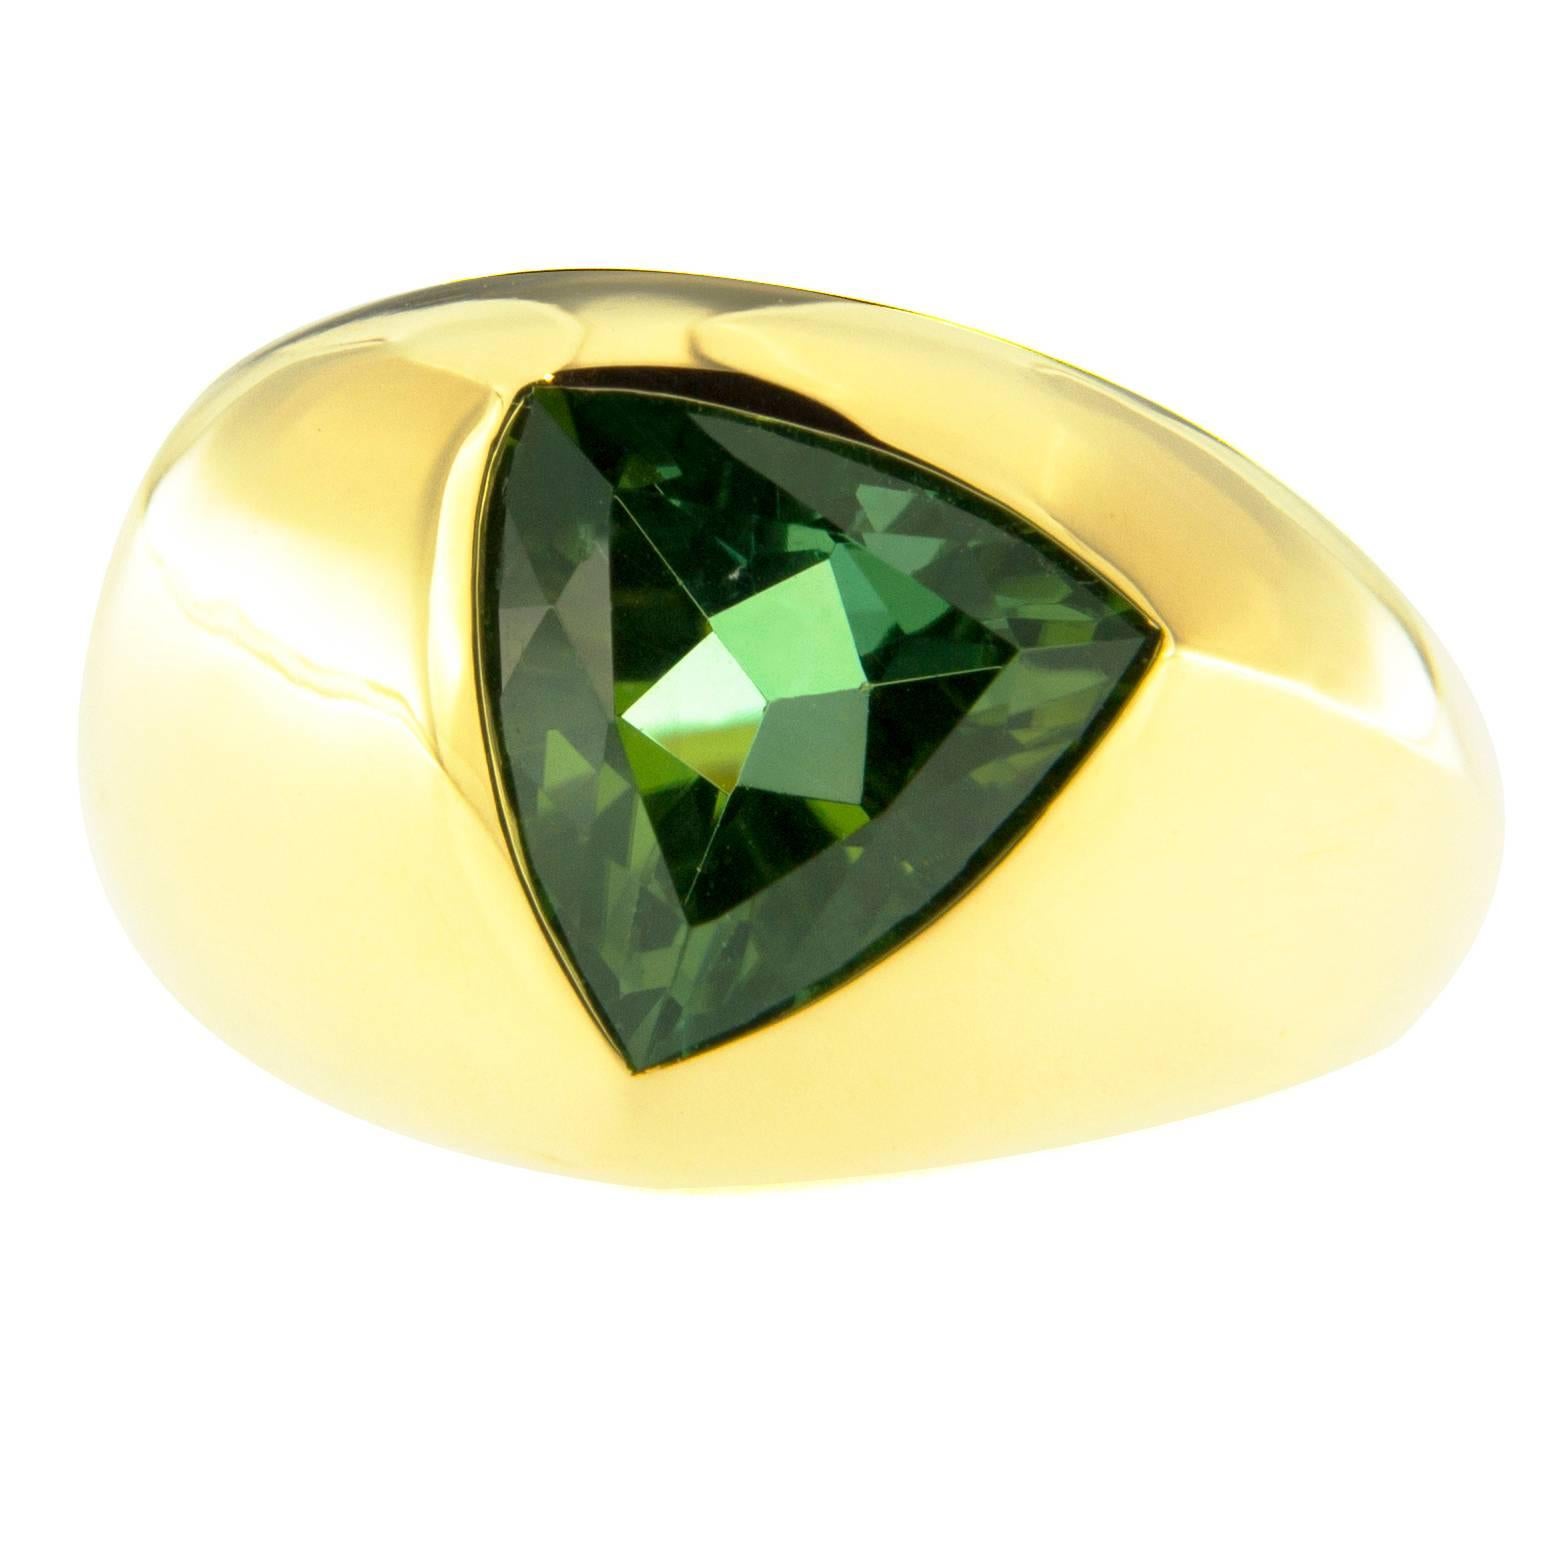 Alex Jona design collection, hand crafted in Italy, 18 karat yellow gold ring set with a trillion cut intense green tourmaline weighing 6.13 carats. US size 6 / EU size 12, can be sized to any specification. Ring Dimensions: H 0.96 in x W 0.84 in x